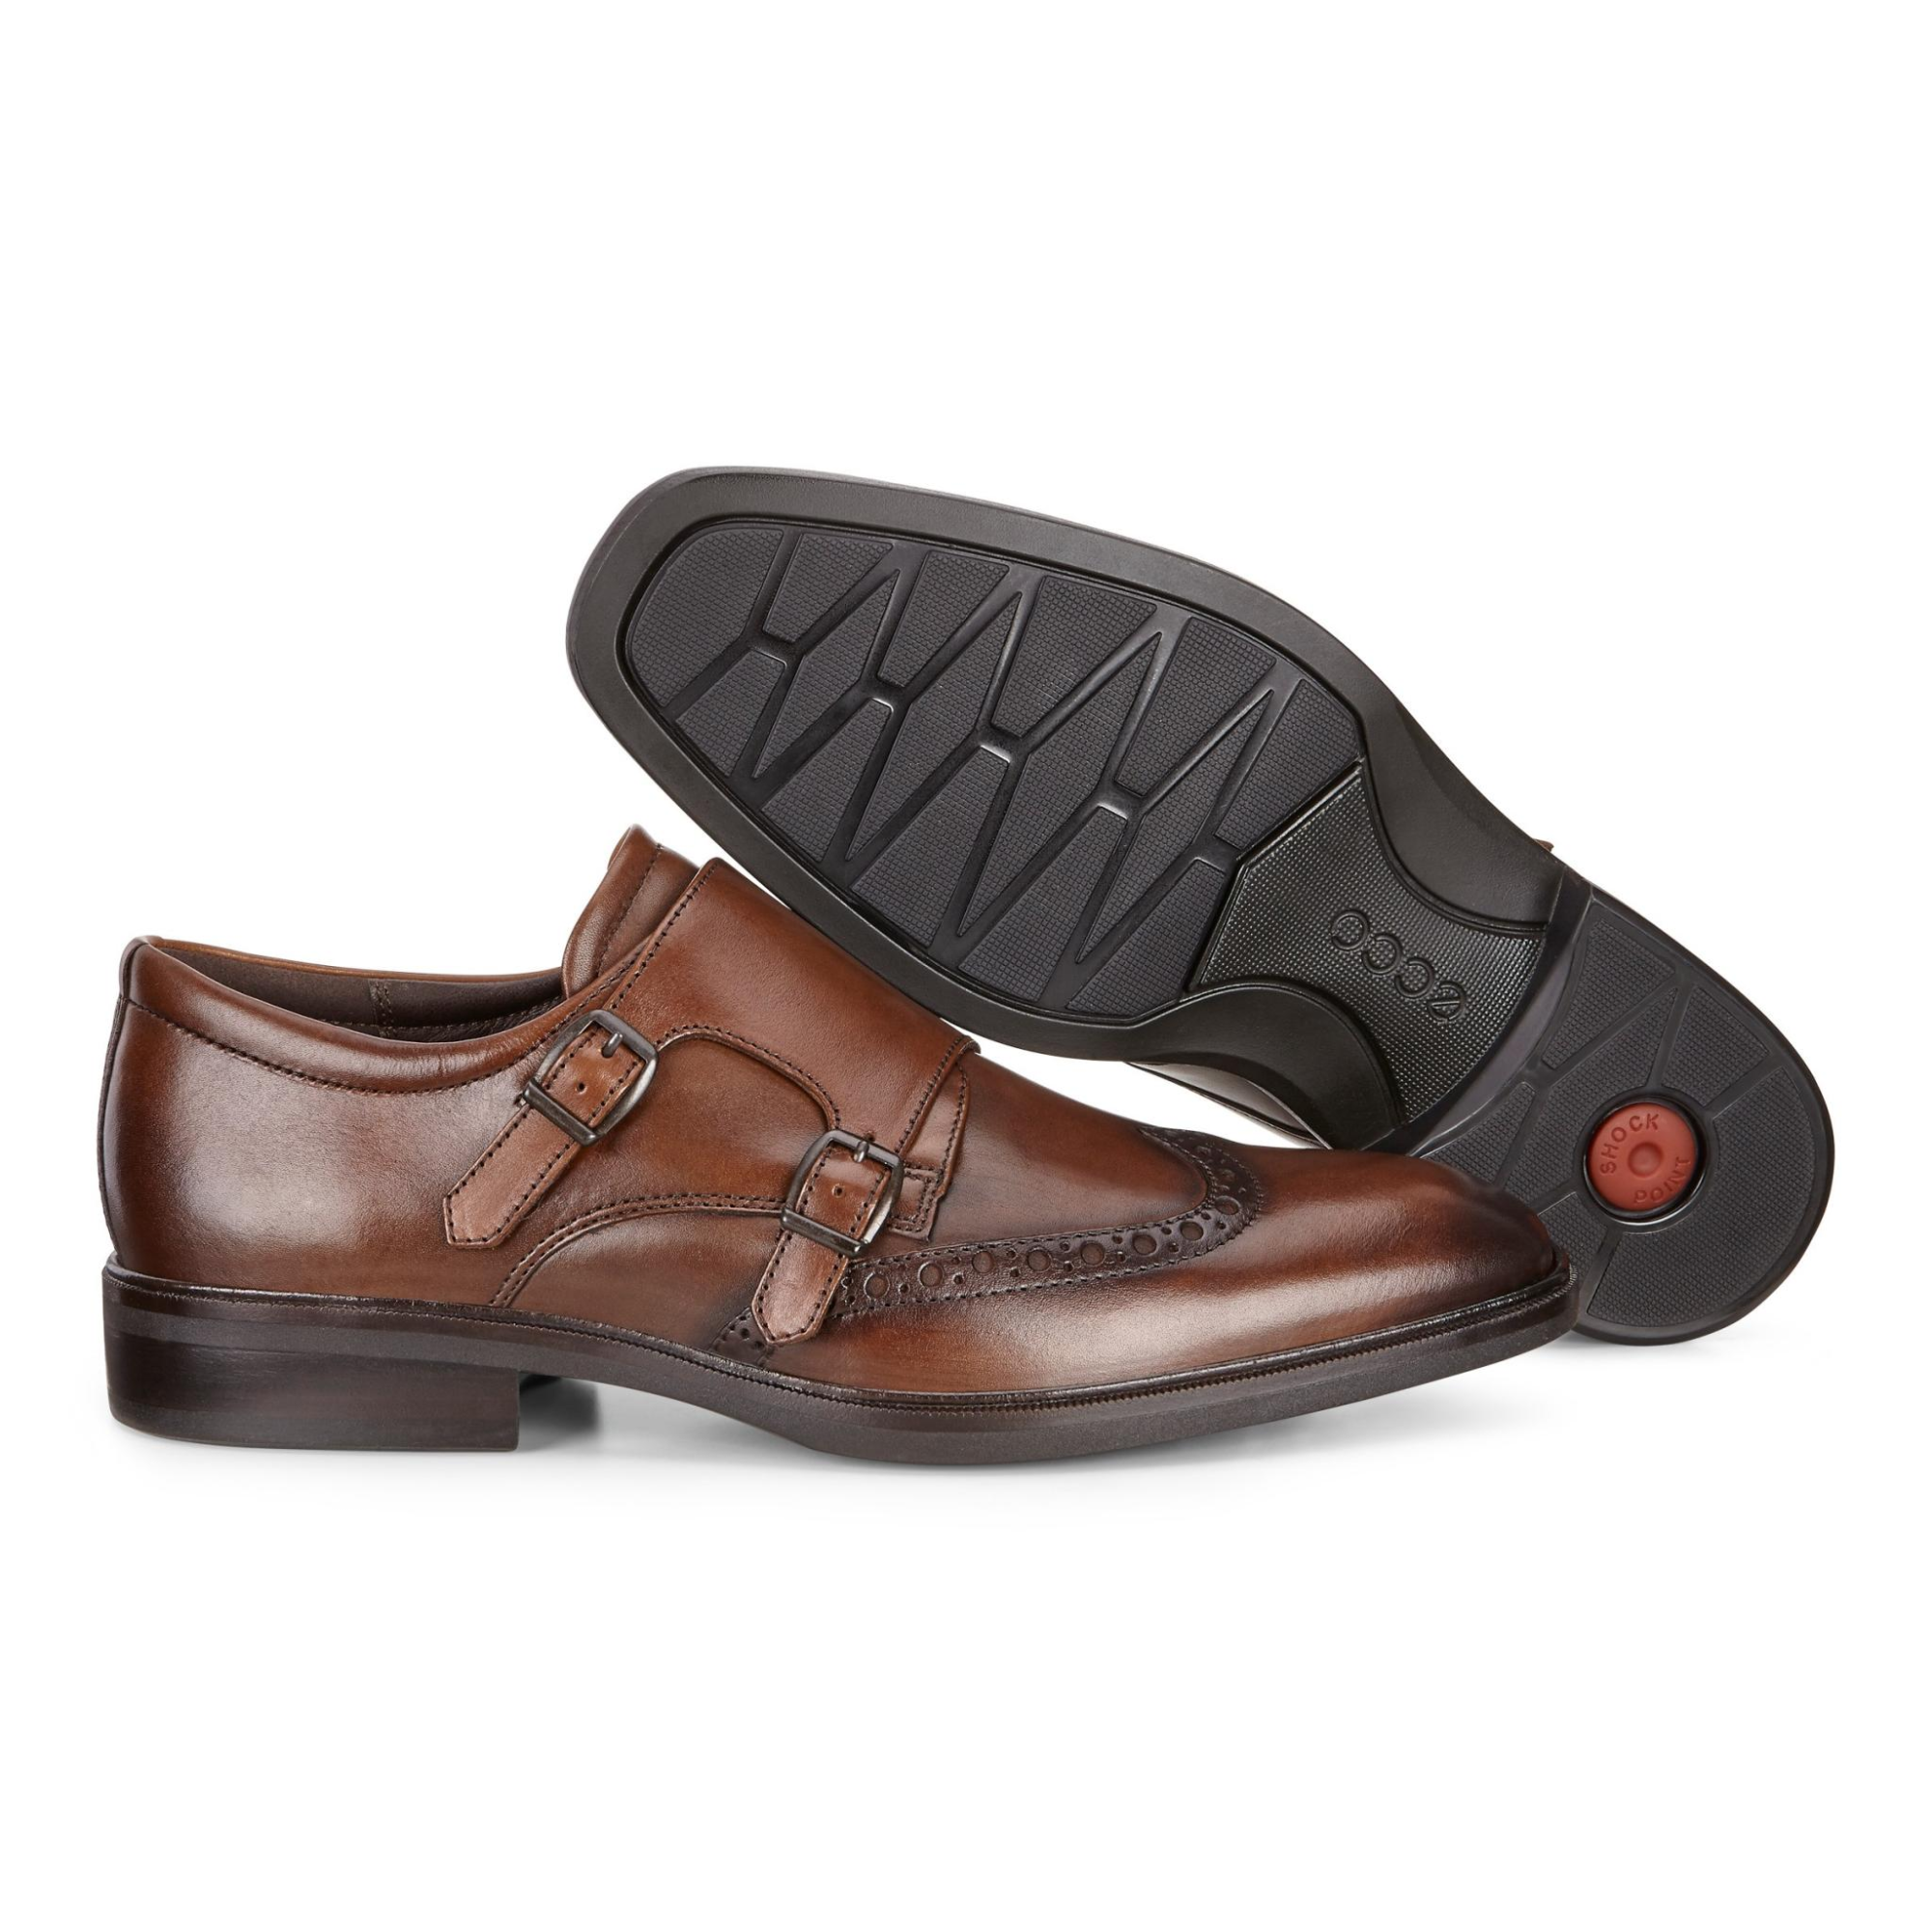 rigdom Vejrtrækning gave Ecco Illinois Monk Strap 43 - Products - Veryk Mall - Veryk Mall, many  product, quick response, safe your money!